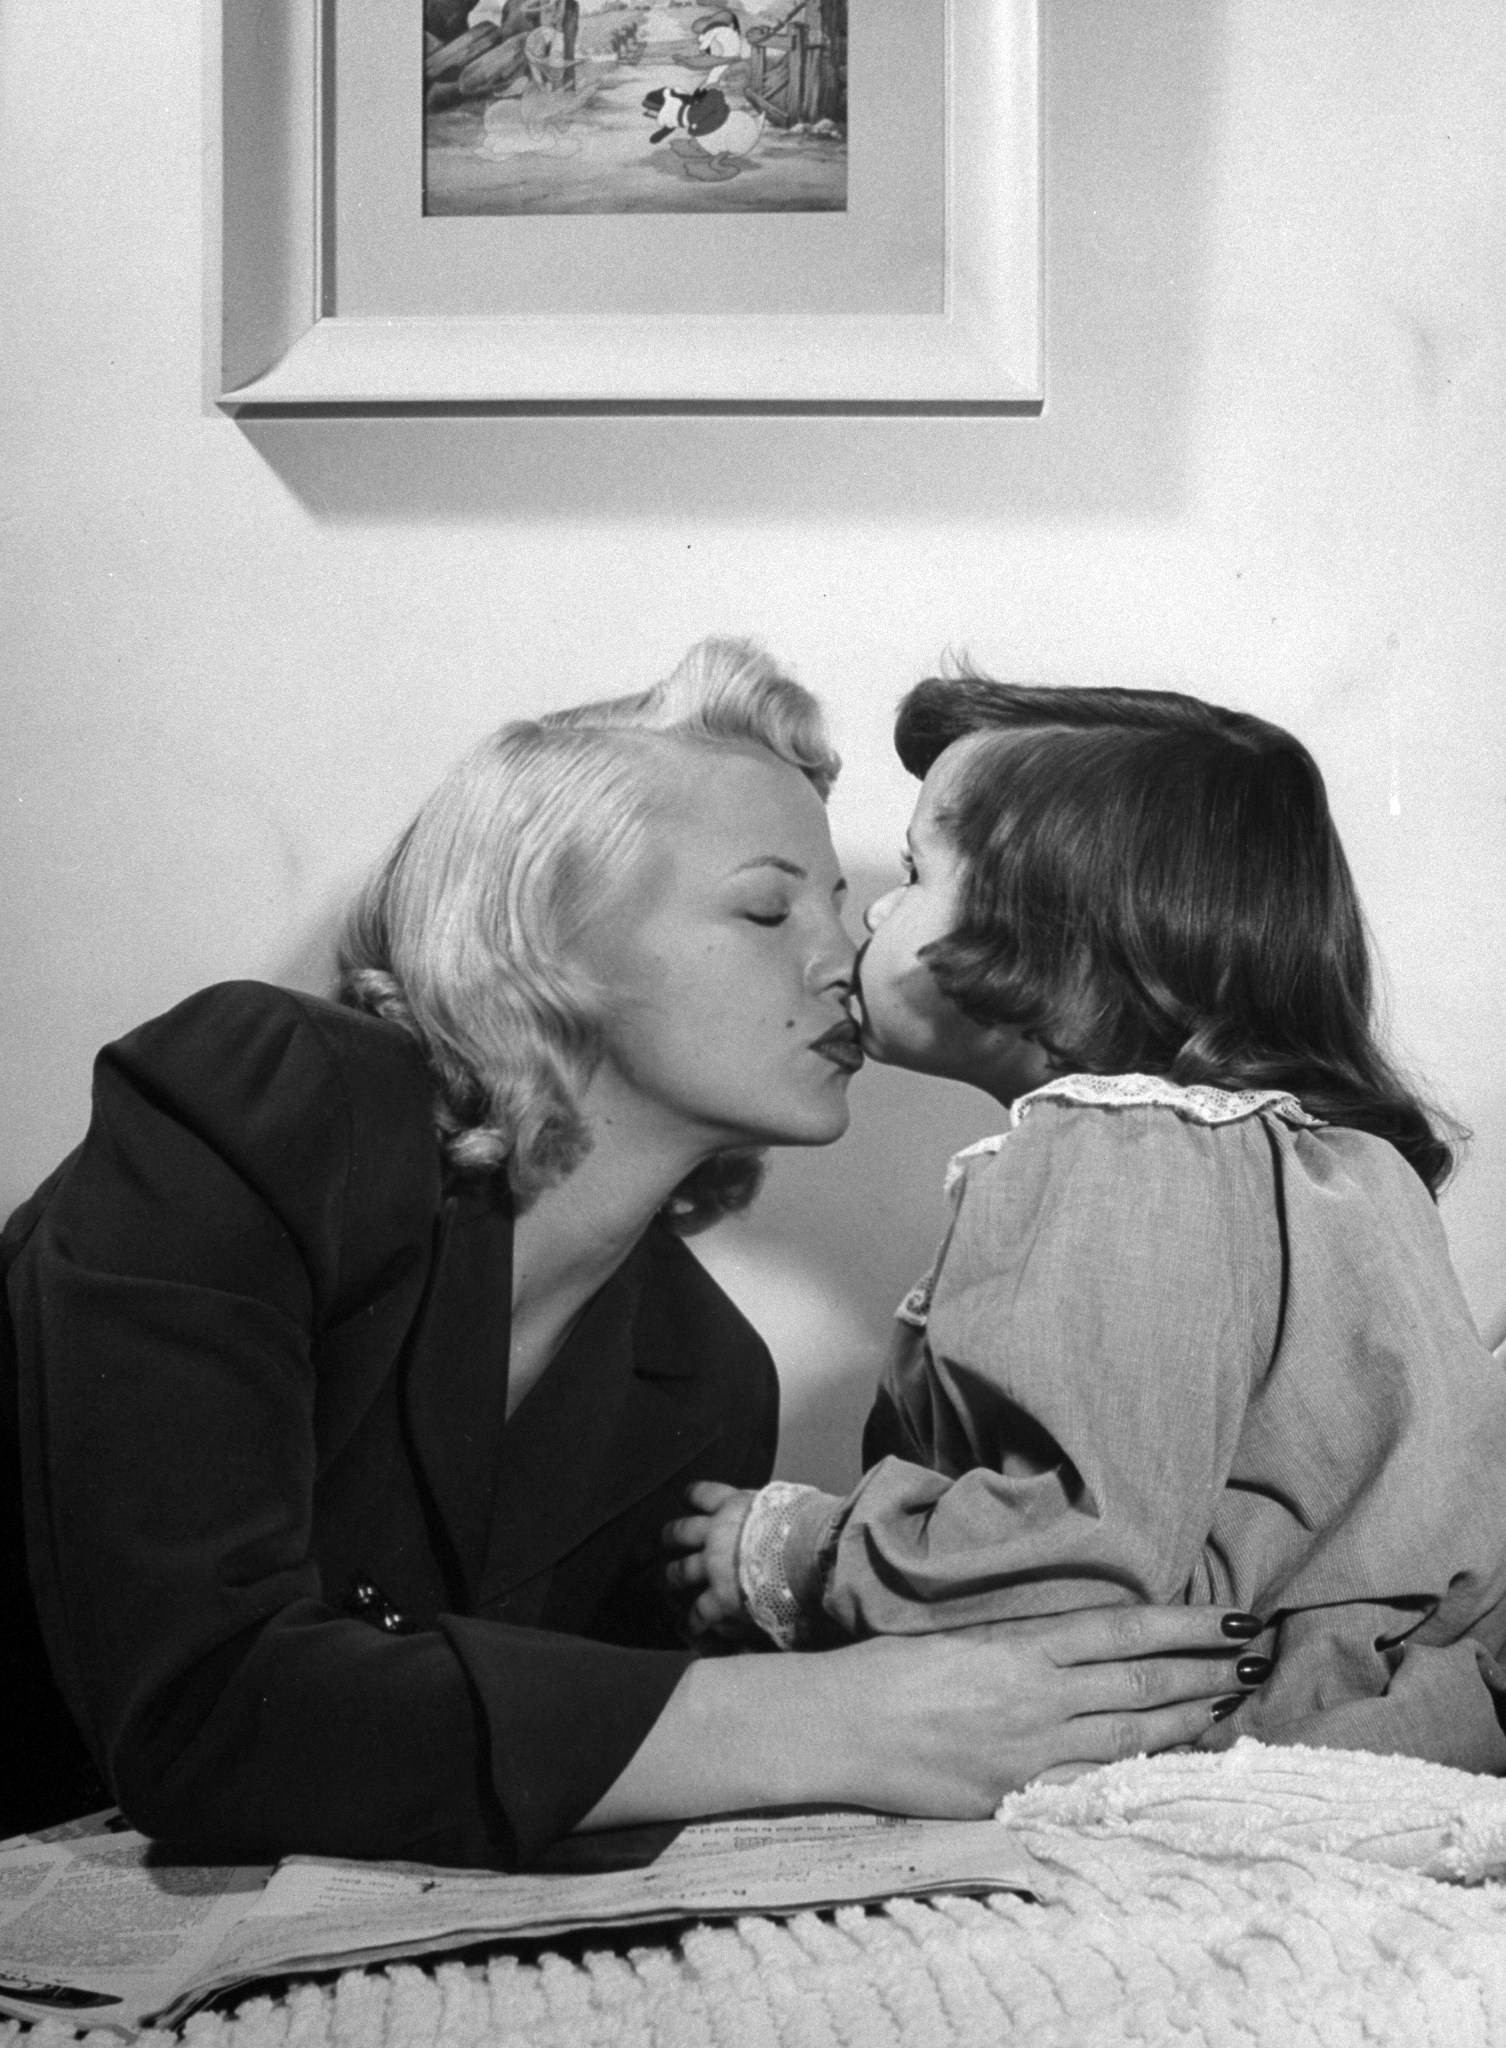 Peggy Lee getting a goodnight kiss on the nose from her 4-year-old daughter Nicki at home. 1948.